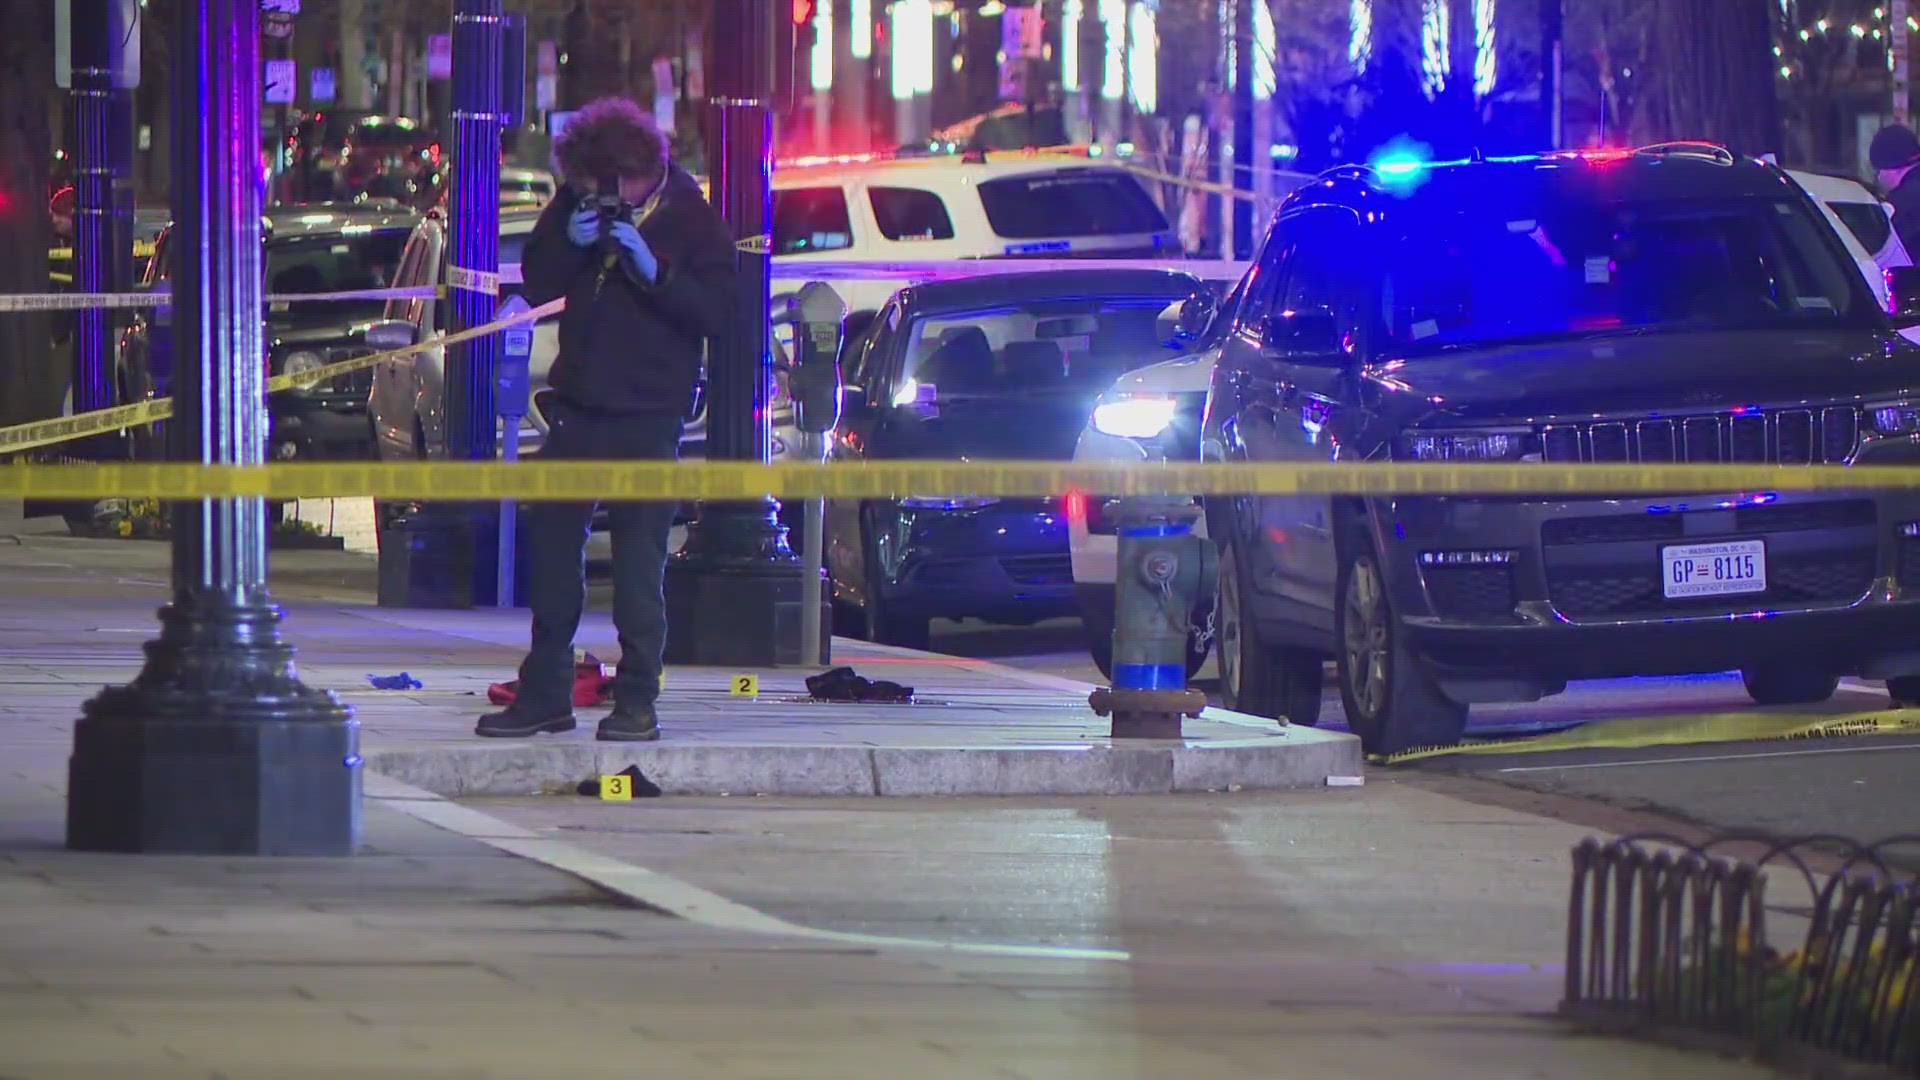 An 11-hour carjacking & shooting rampage from DC to Maryland ... ended with the carjacker being killed by police.